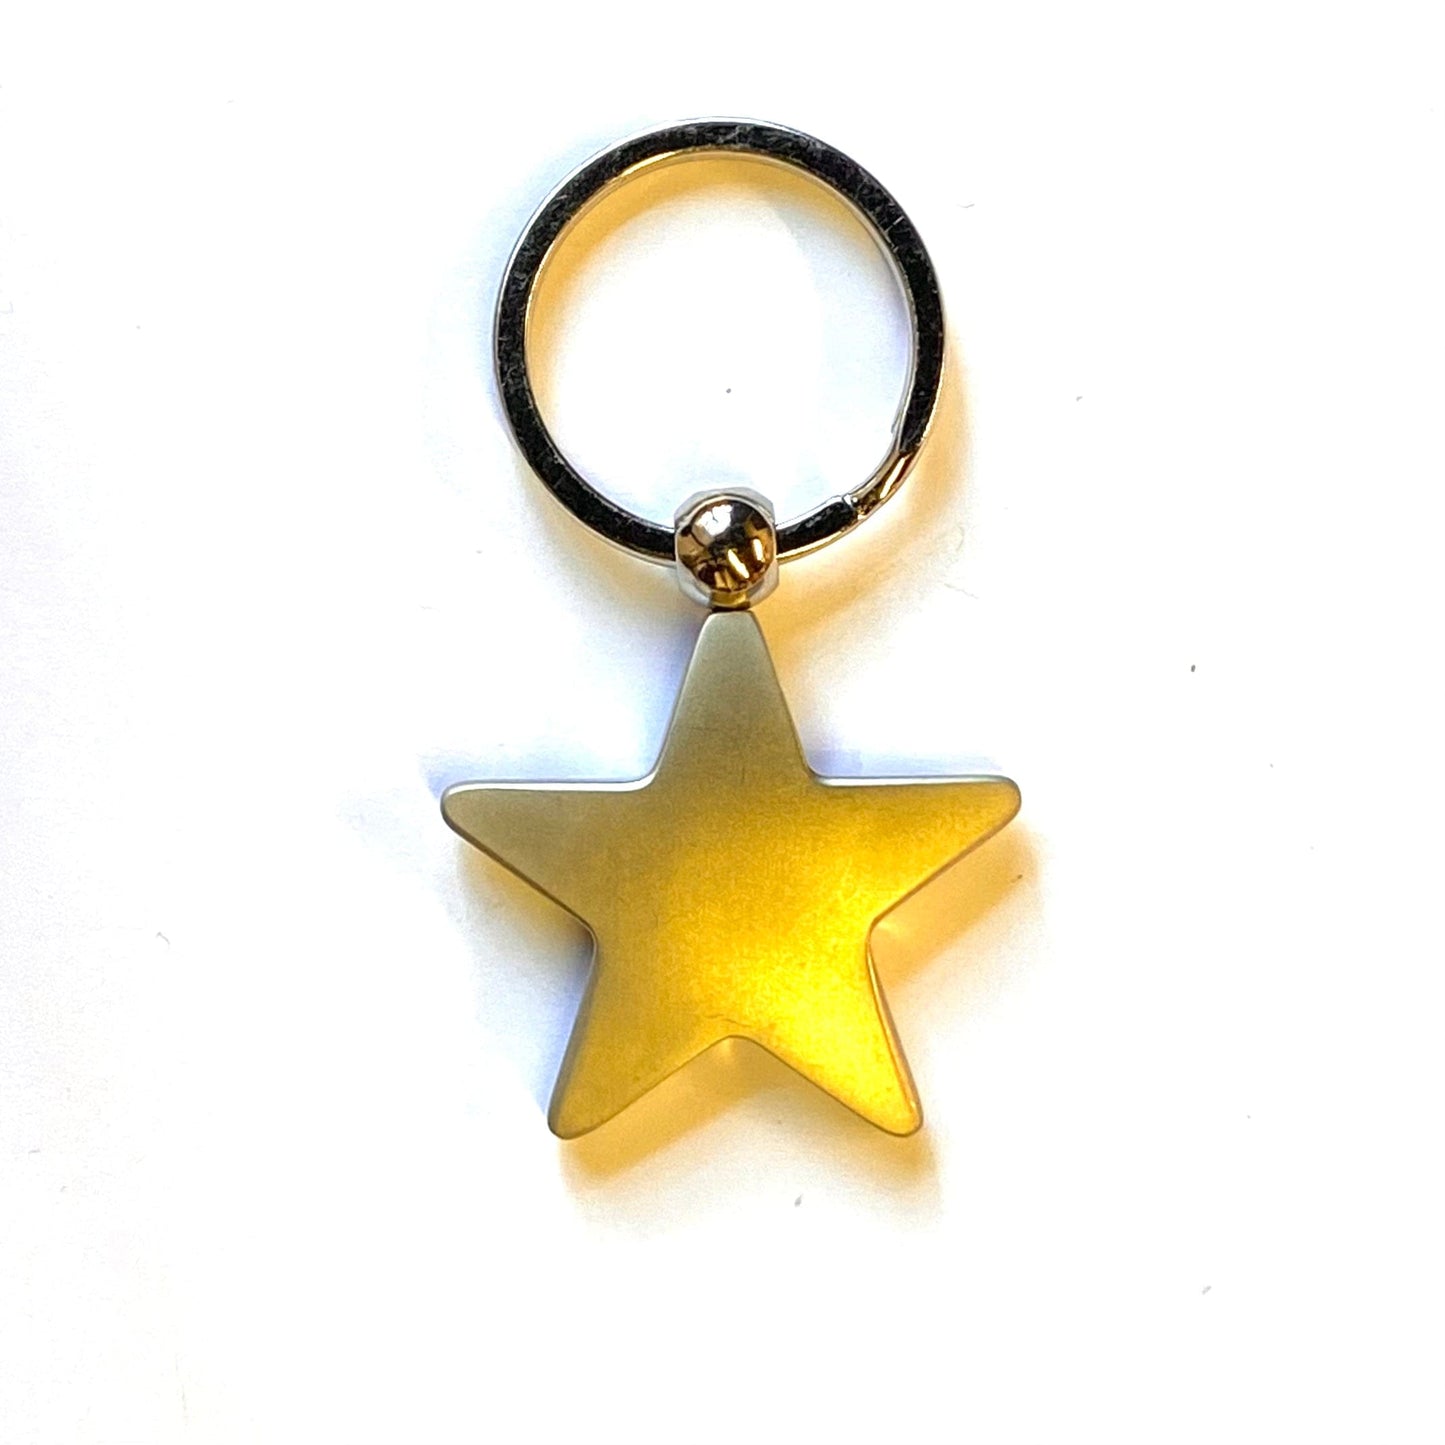 LIFE CARE CENTERS OF AMERICA Silvertone Star Keychain Key Ring Charm